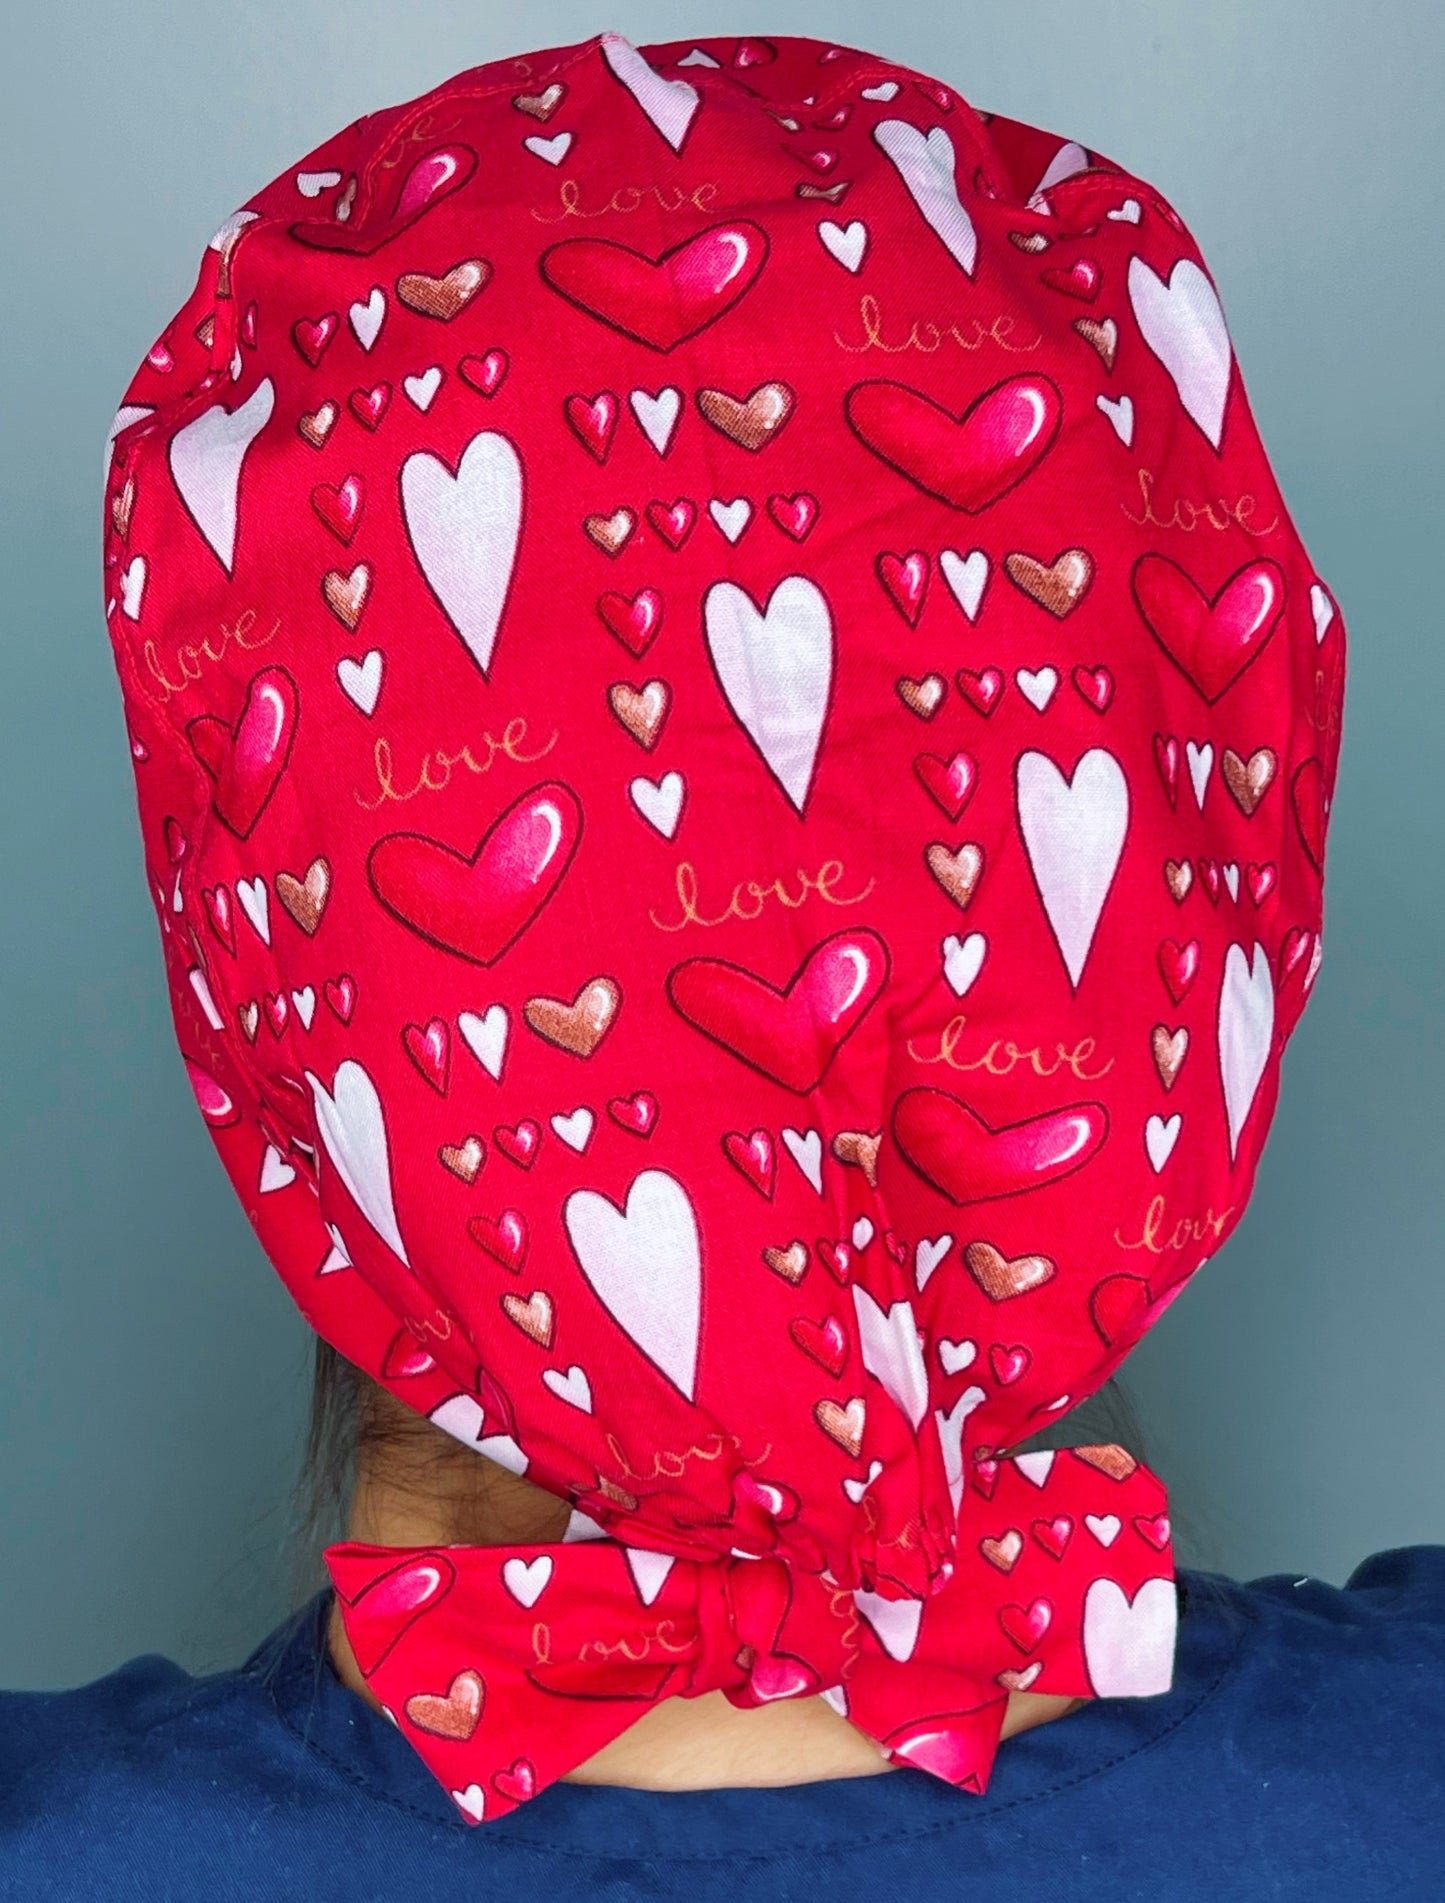 Different Shaped Hearts on Red Valentine's Day Holiday Themed Pixie